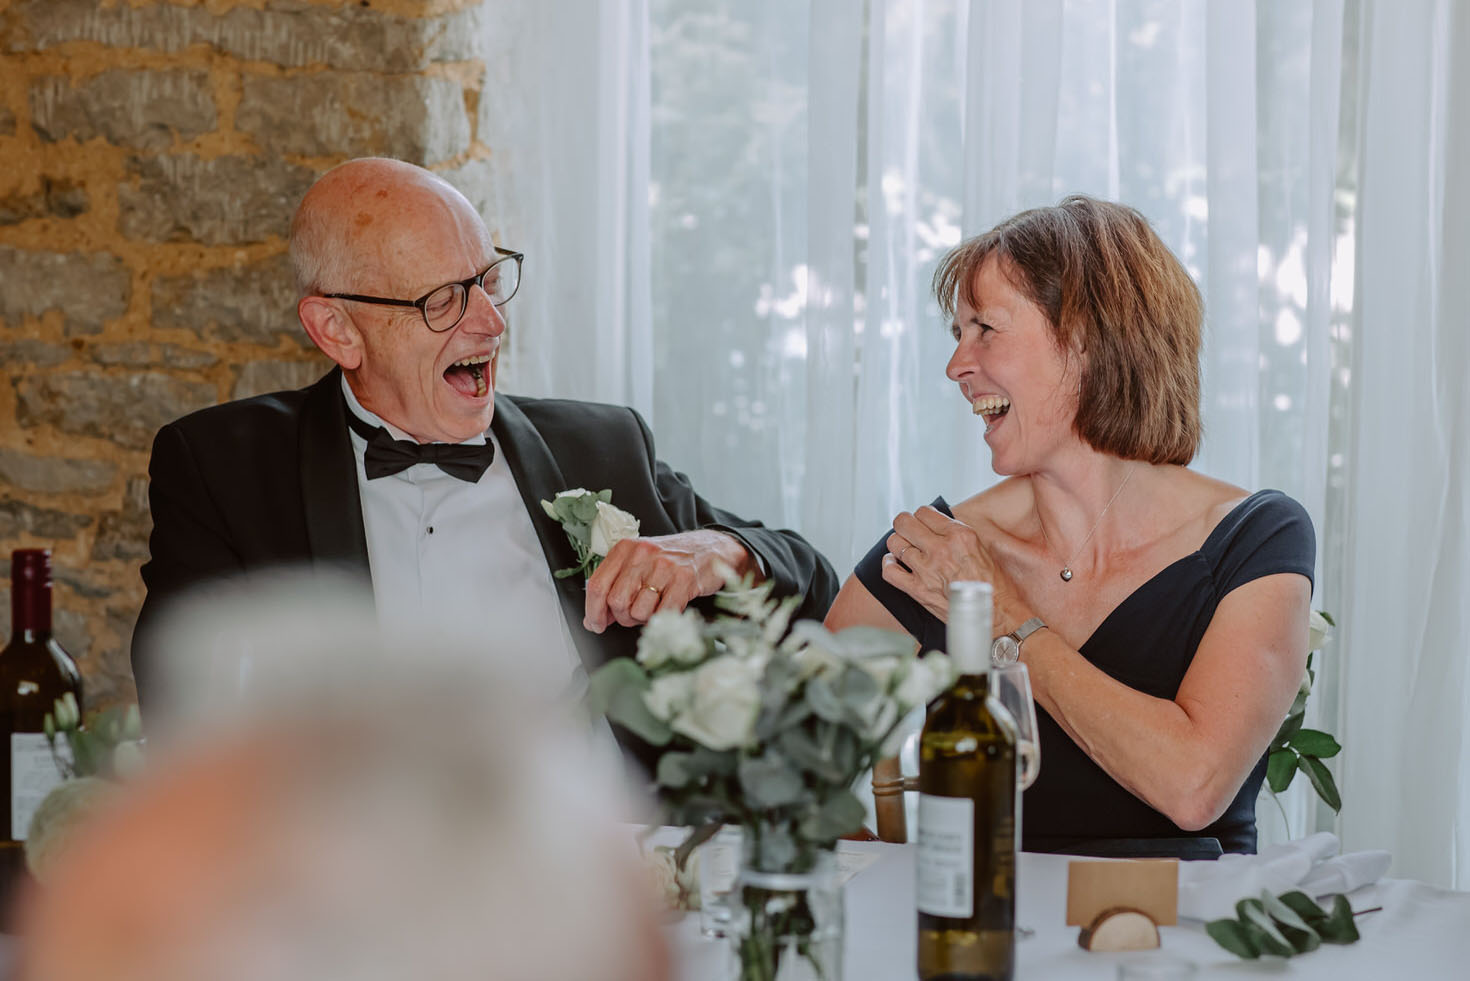 A man and woman laughing at a table at a wedding.